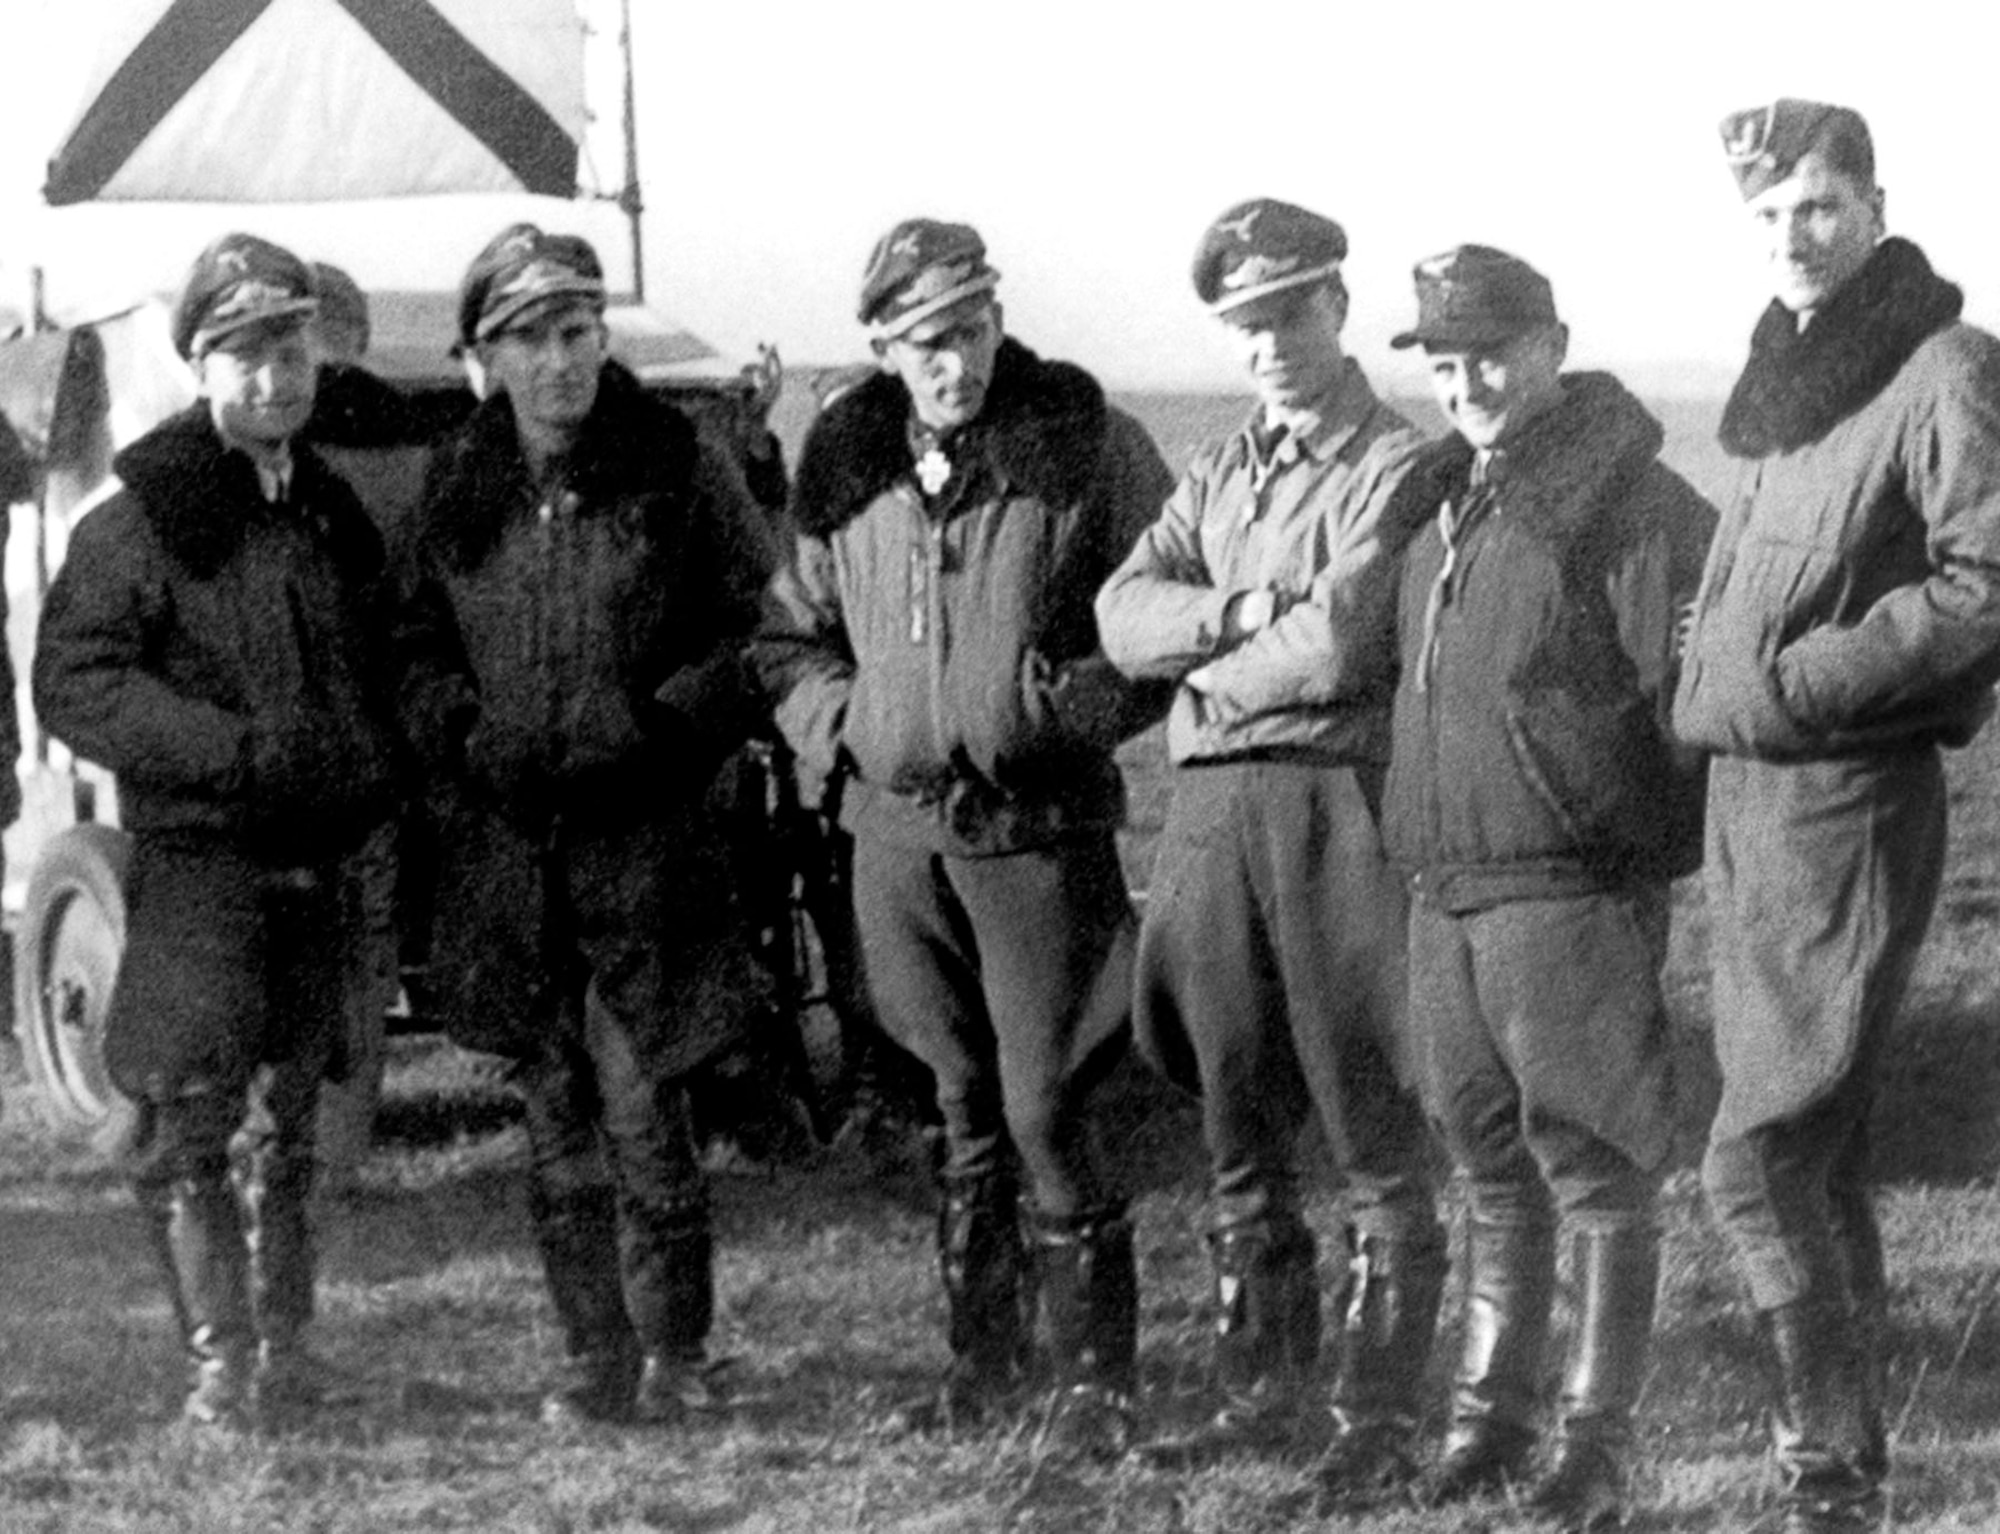 Luftwaffe fighter pilots at an airfield in Germany in 1944. (U.S. Air Force photo)